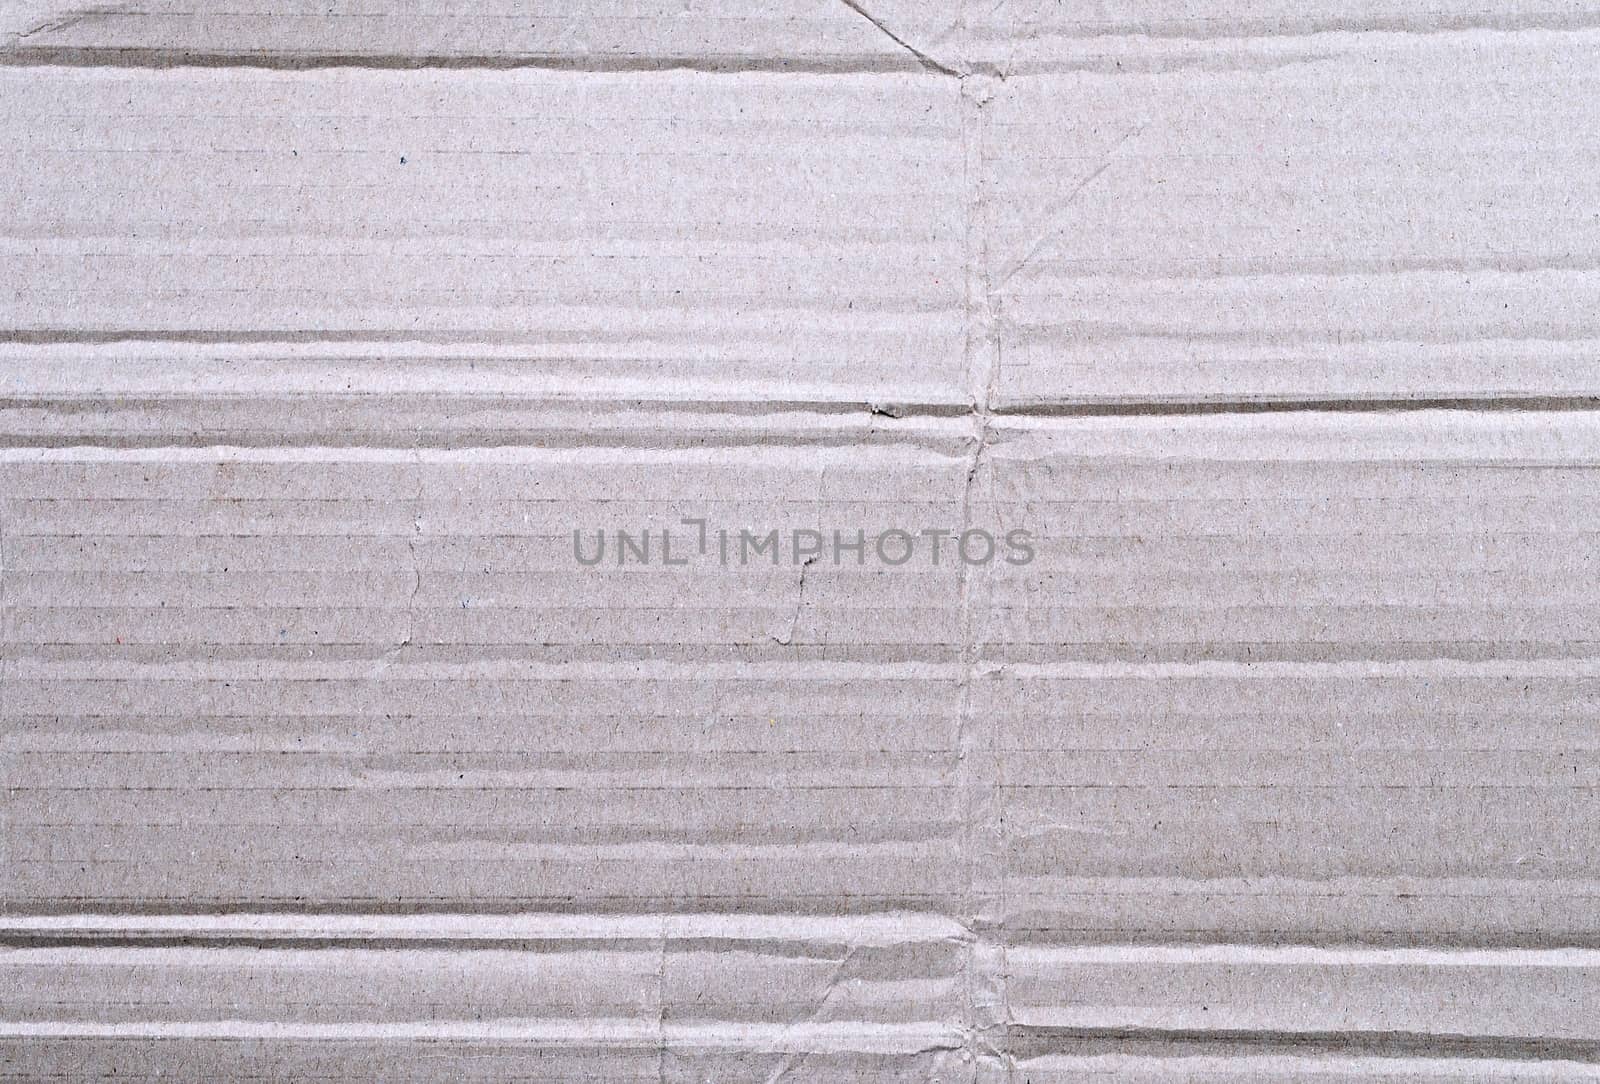 Full frame texture of blank crumpled and wrinkled white cardboard background.